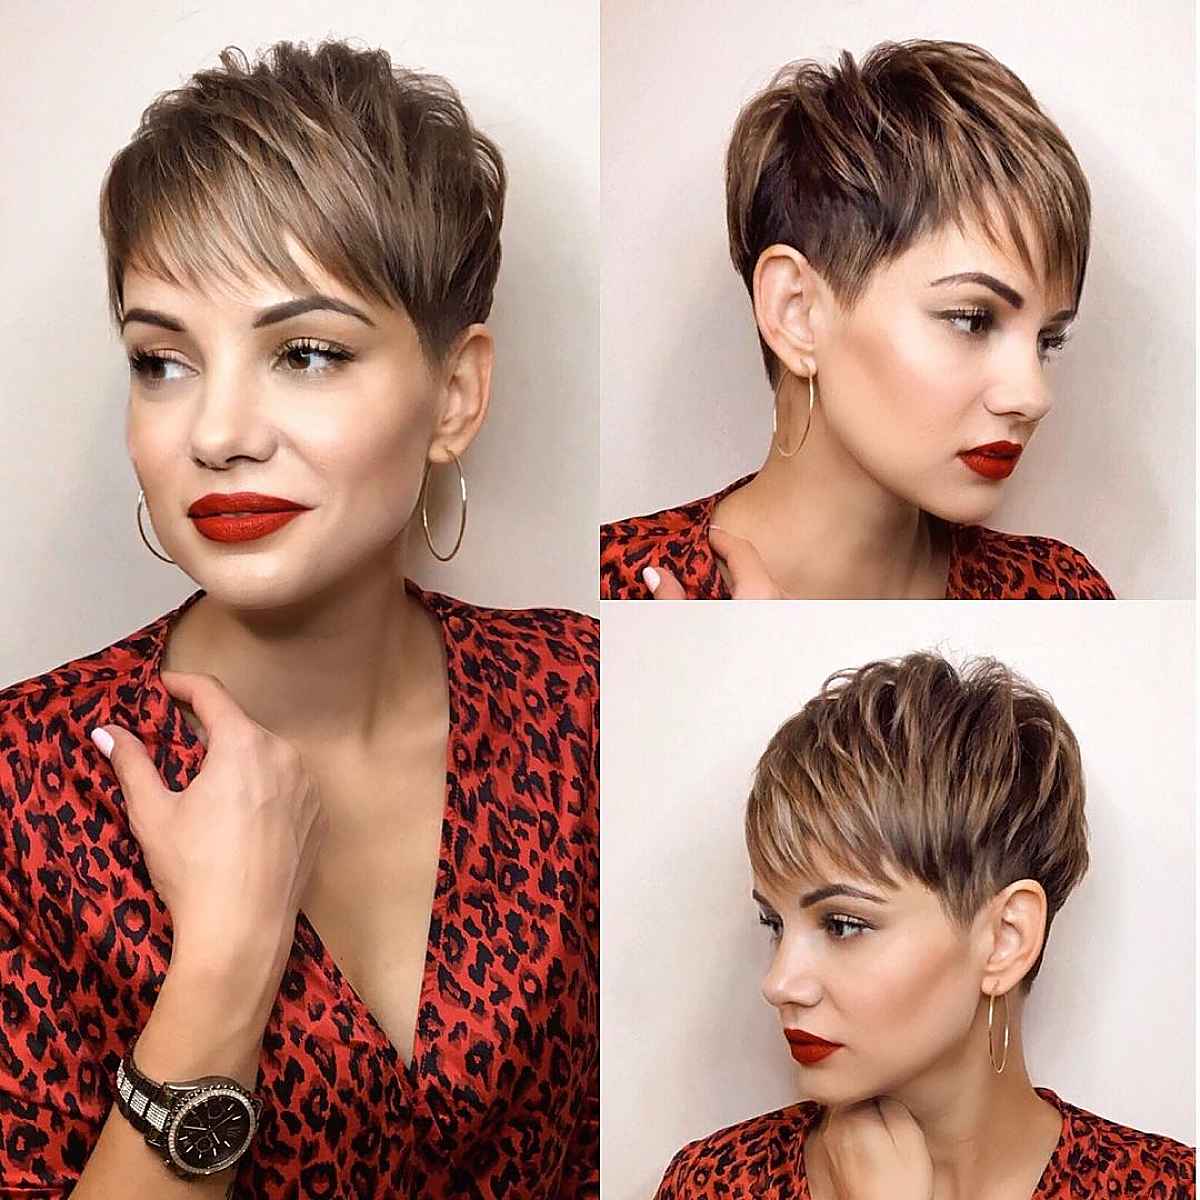 Edgy Pixie Cut with Bangs